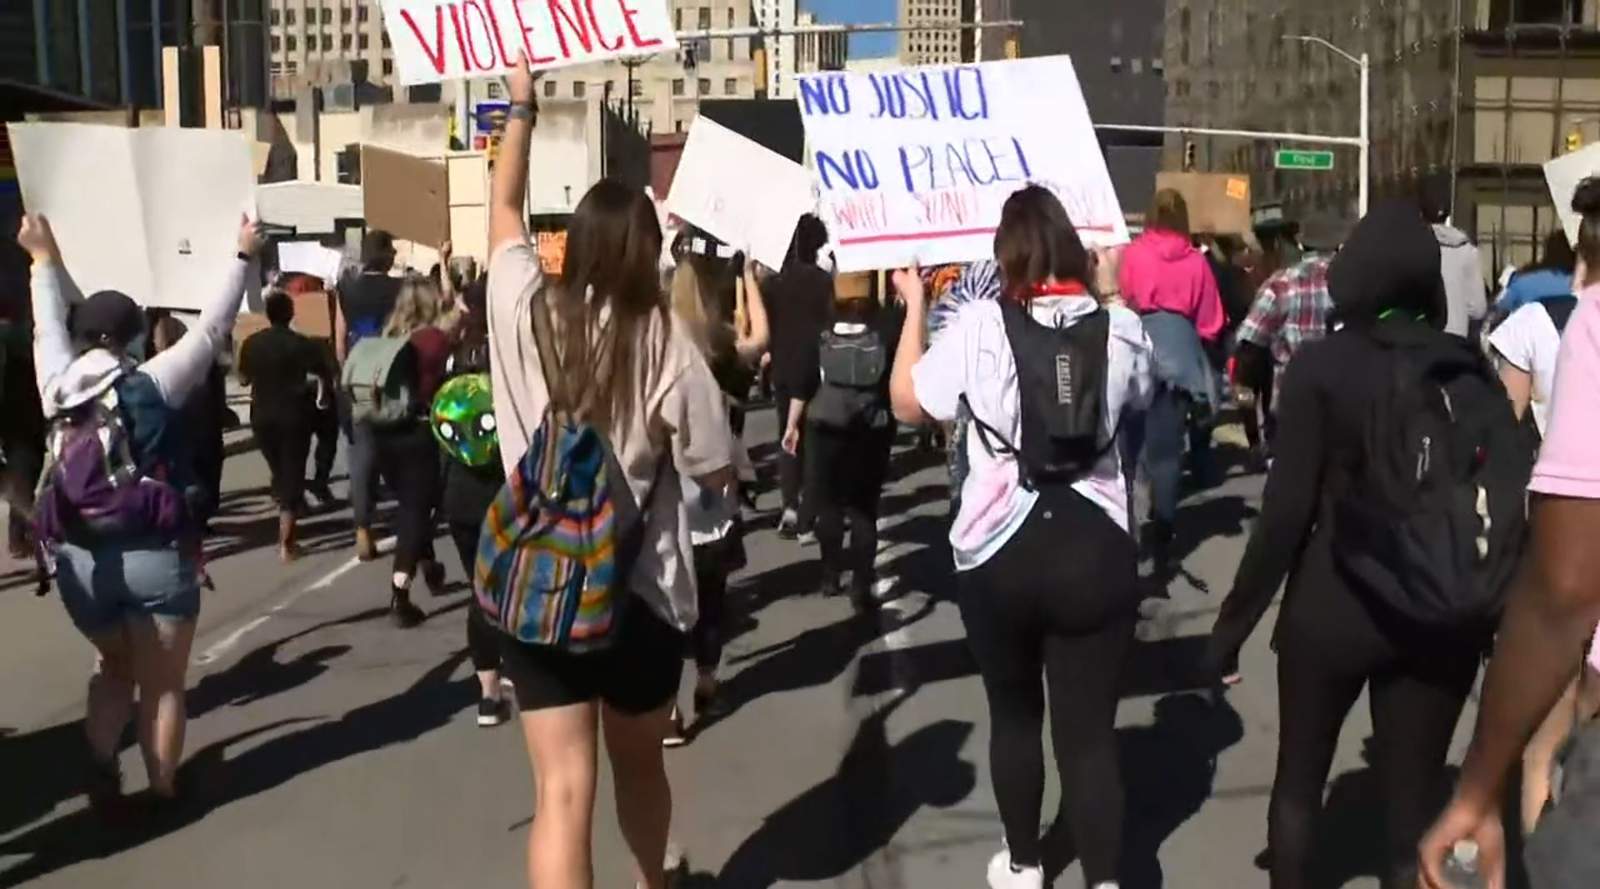 Watch: Demonstrators crowd Detroit for third day of protests